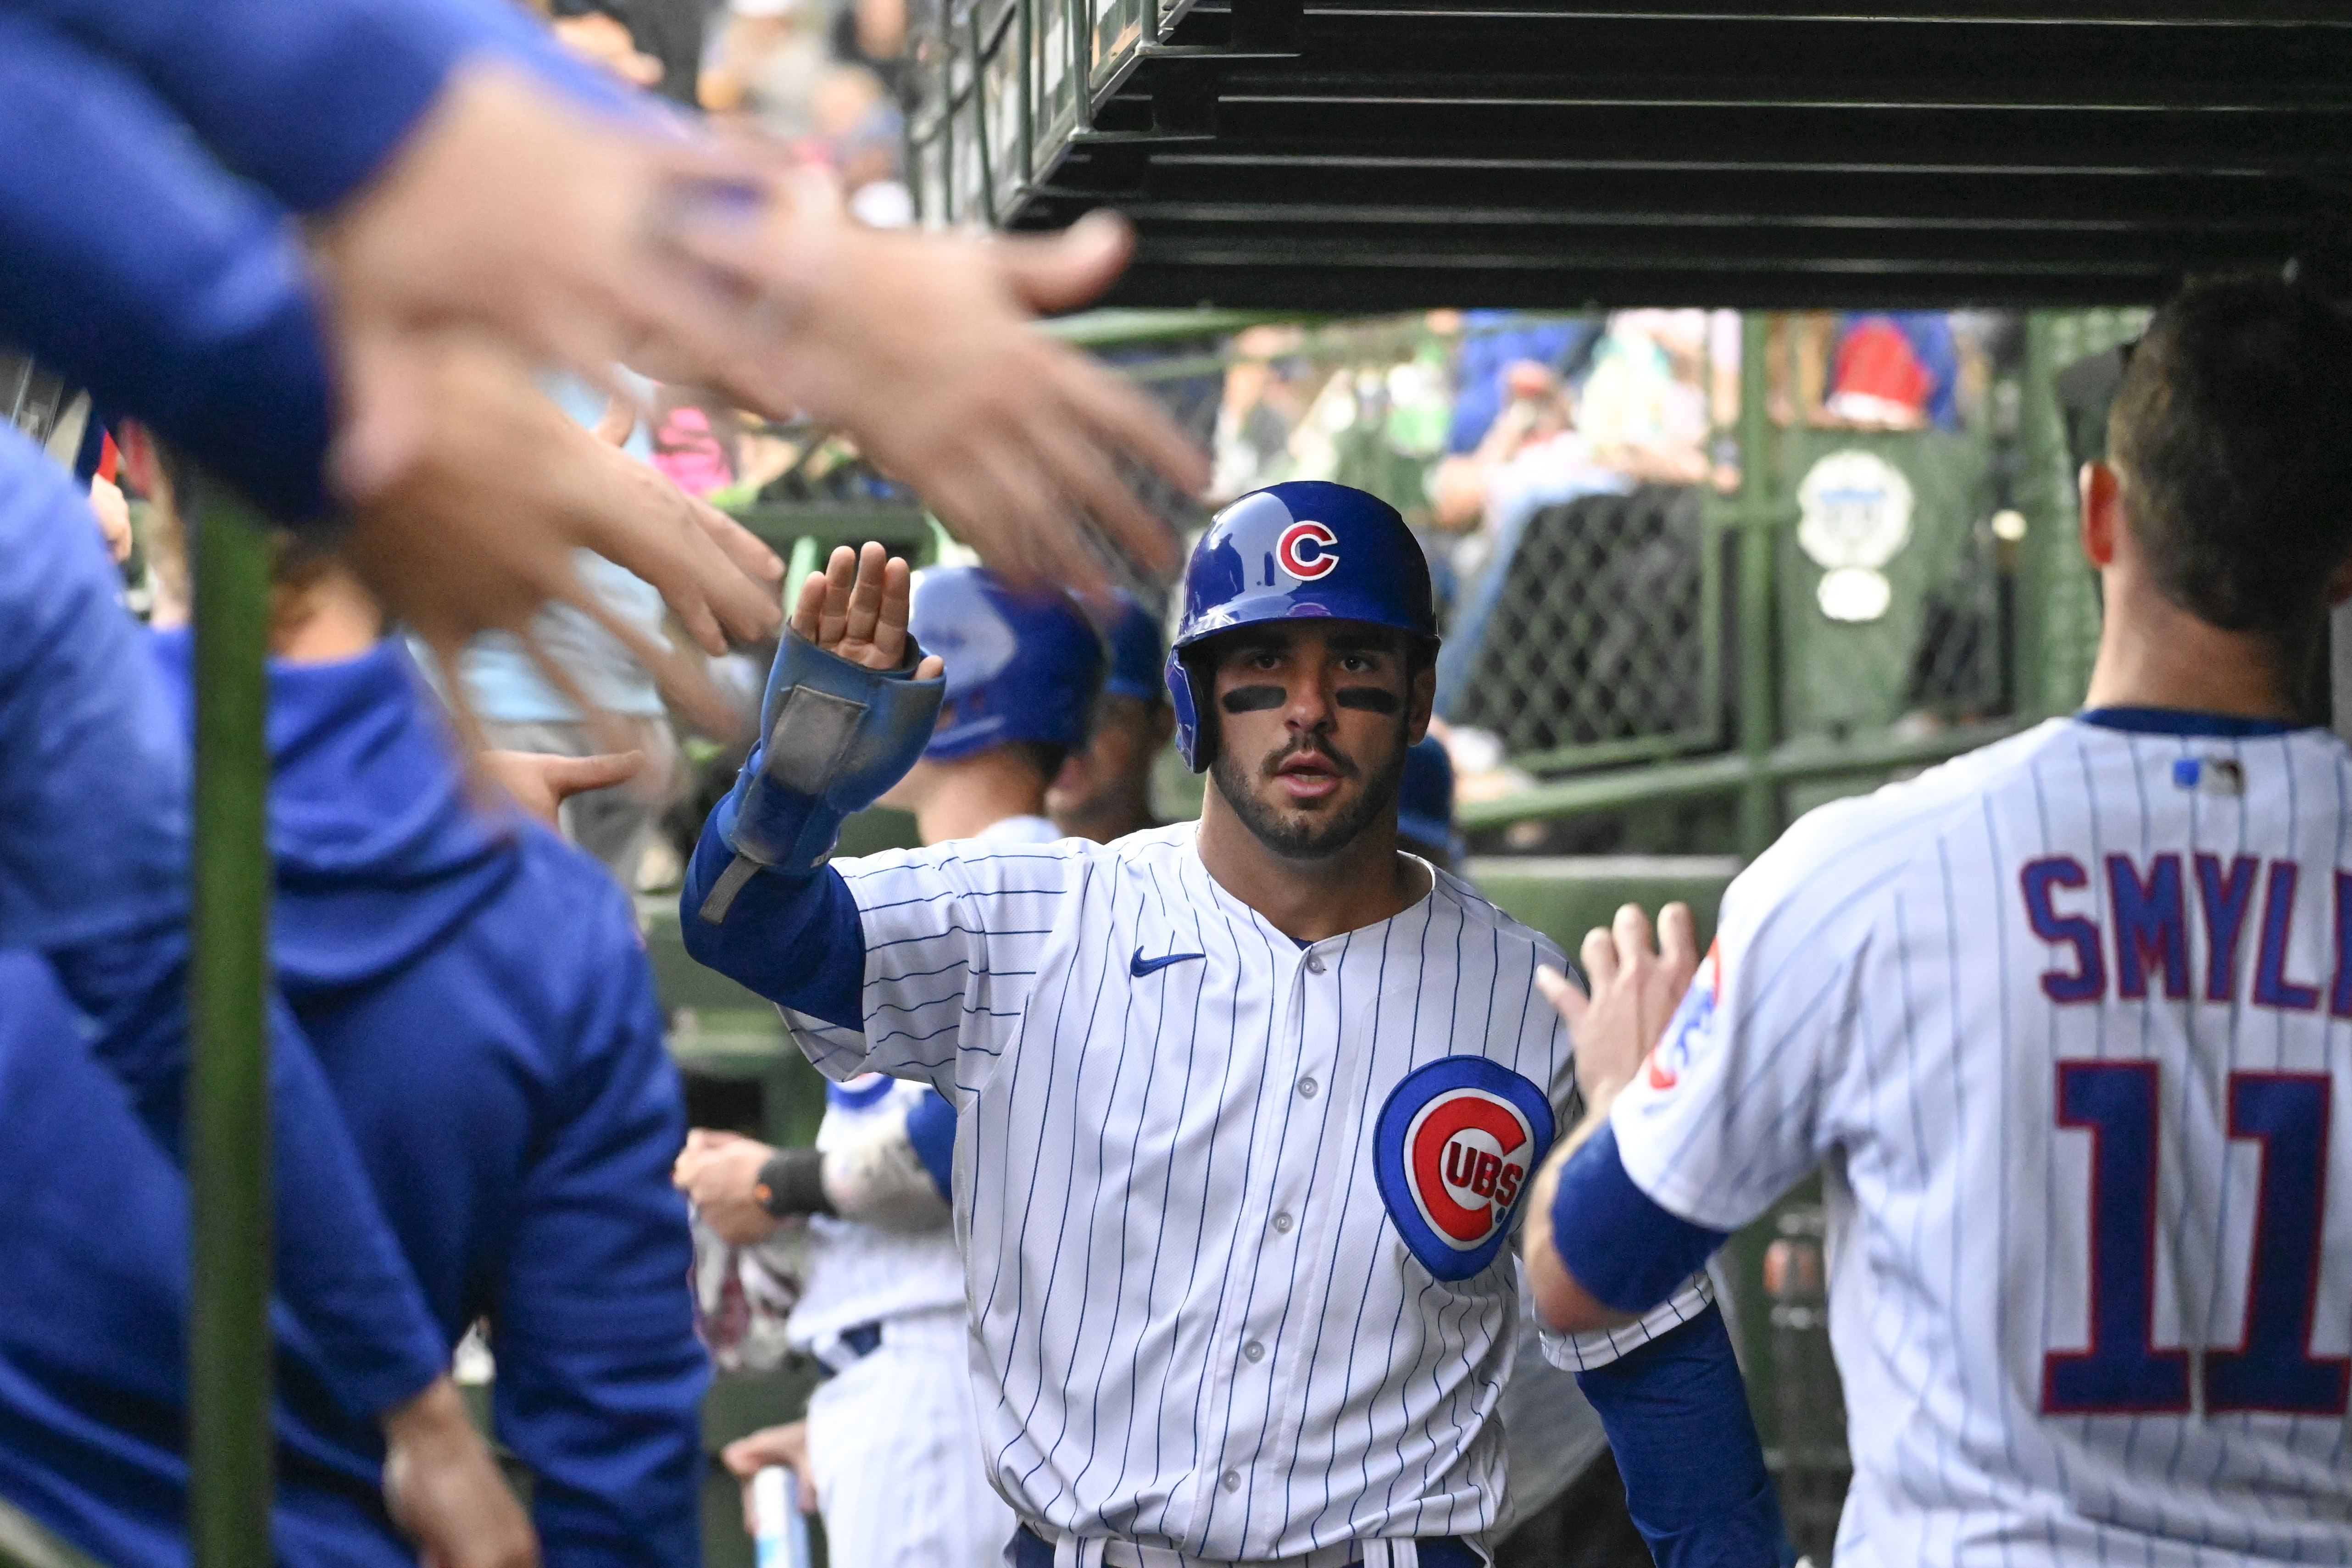 Cubs use 6-run inning to dispatch Pirates